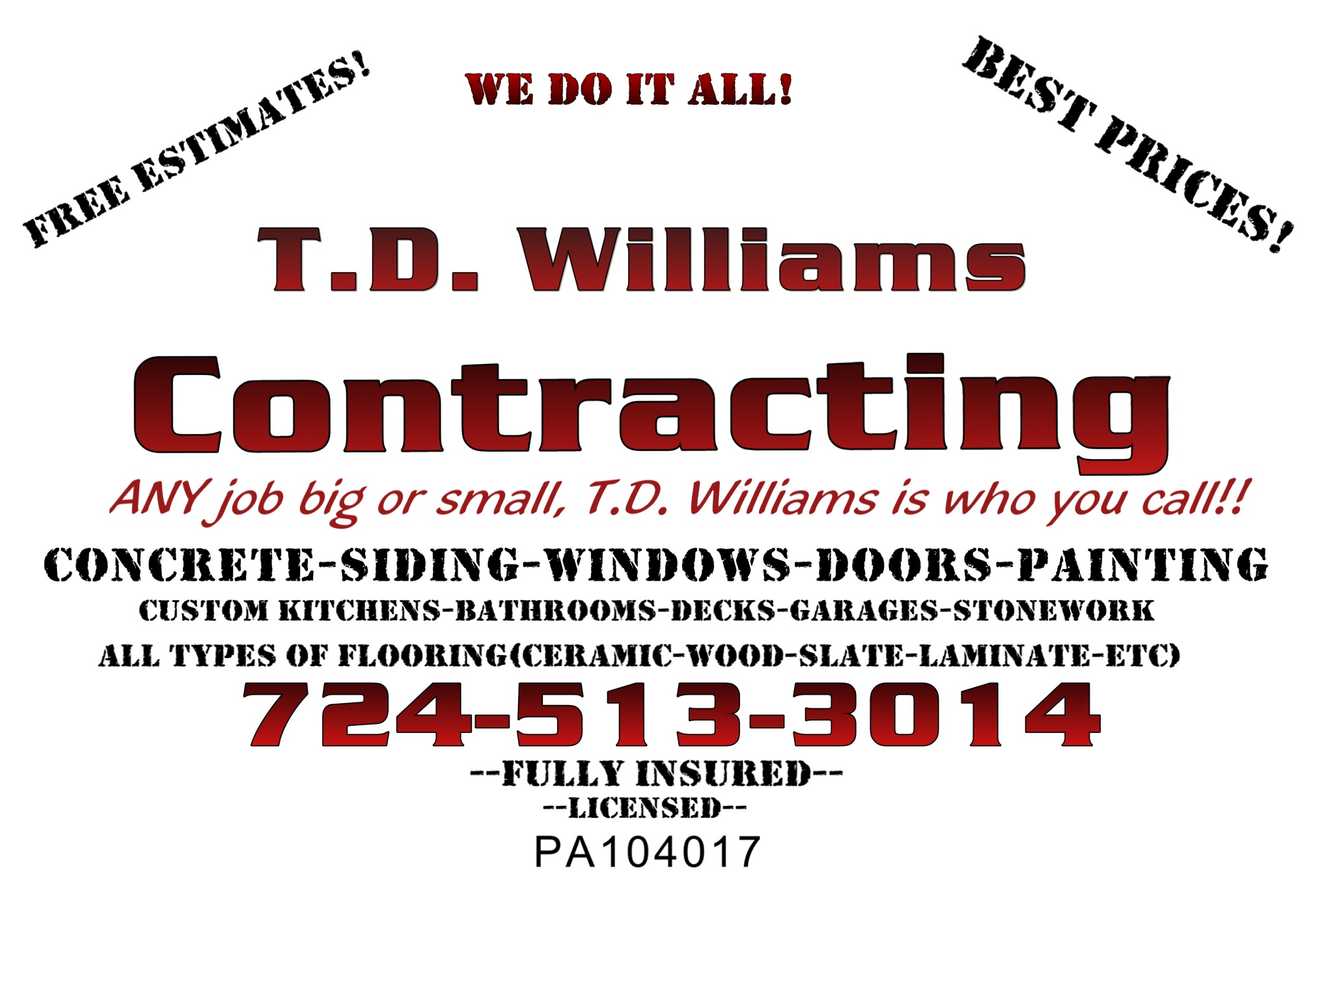 Projects by Td Williams Contracting